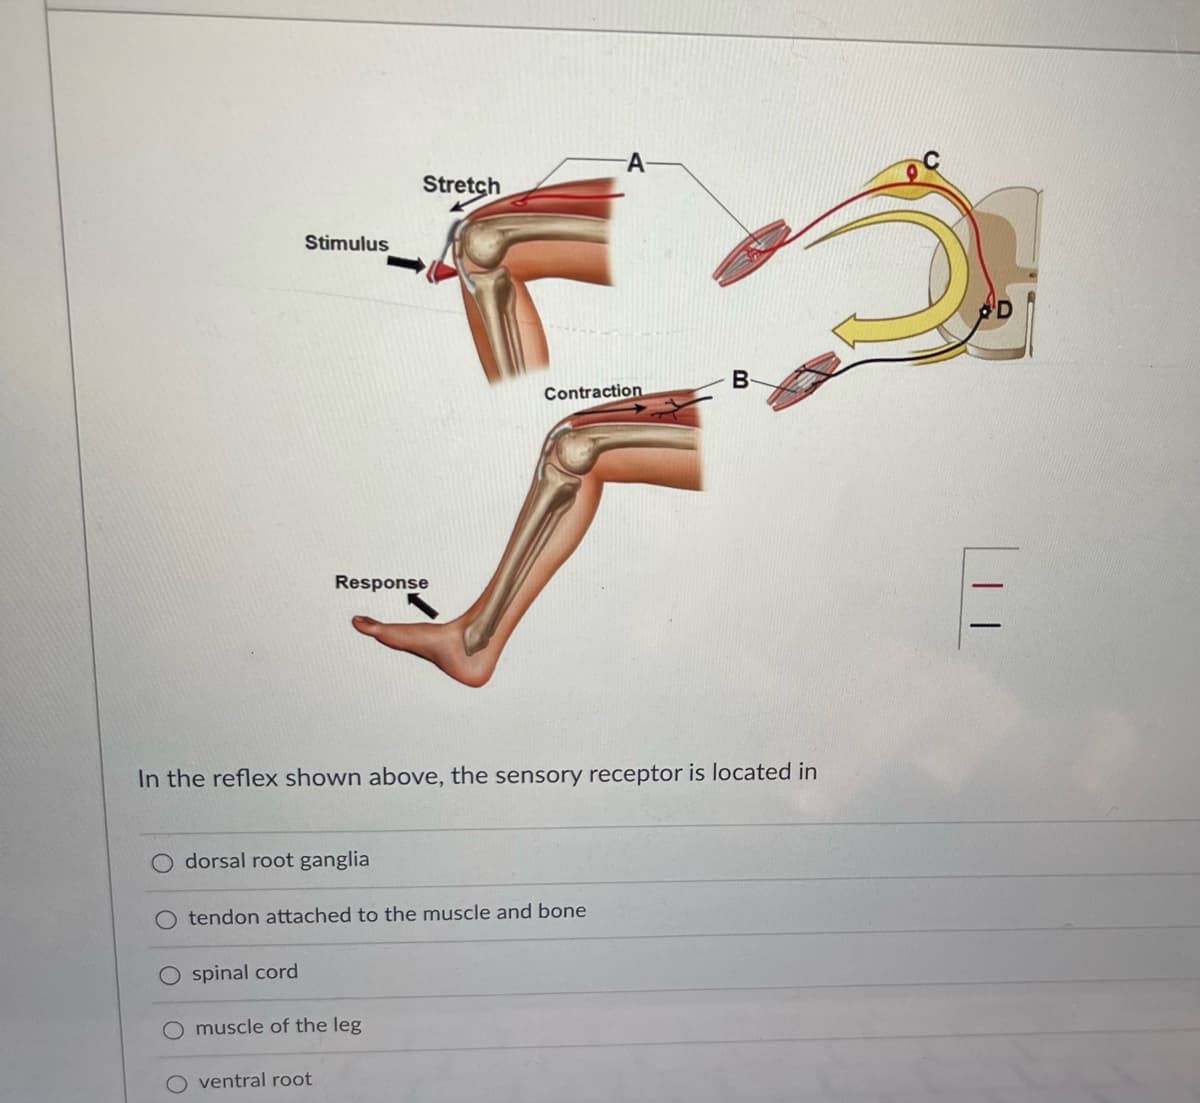 Stimulus
dorsal root ganglia
Ospinal cord
Response
Stretch
In the reflex shown above, the sensory receptor is located in
tendon attached to the muscle and bone
muscle of the leg
ventral root
-A-
Contraction
B